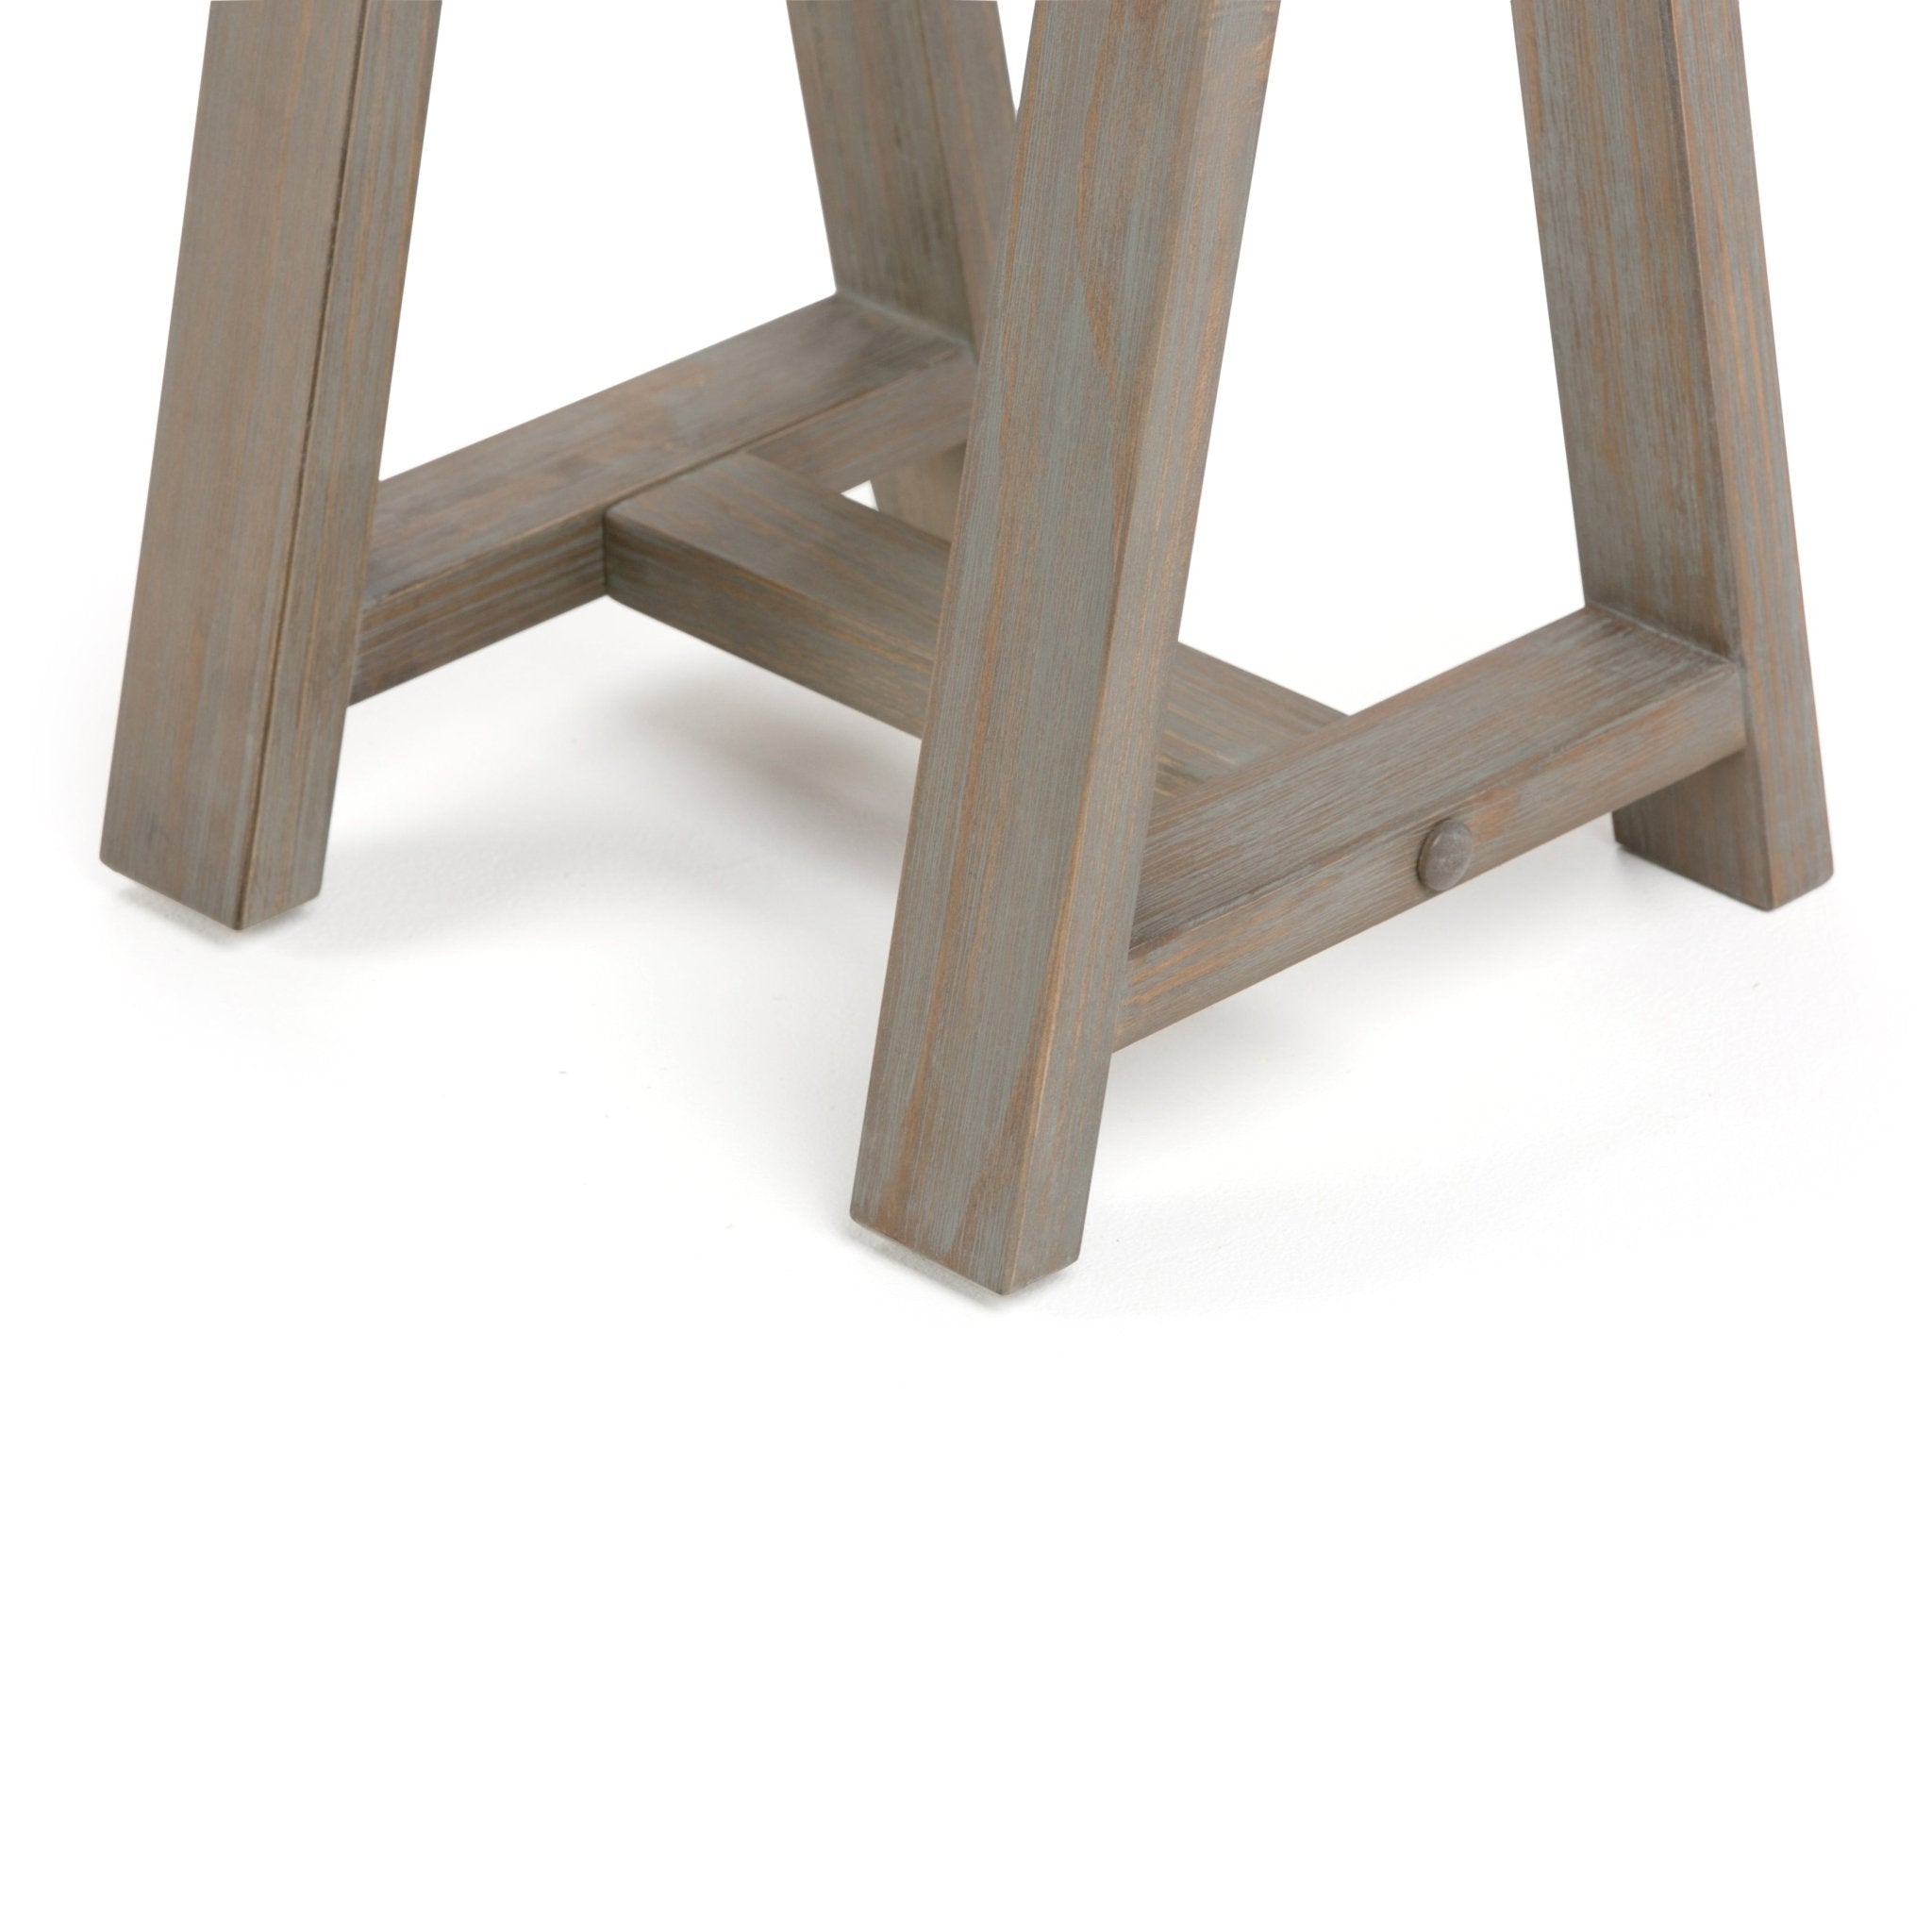 Serenique Solid Wood Console Table with Sawhorse Supports - Sofa & Console Tables